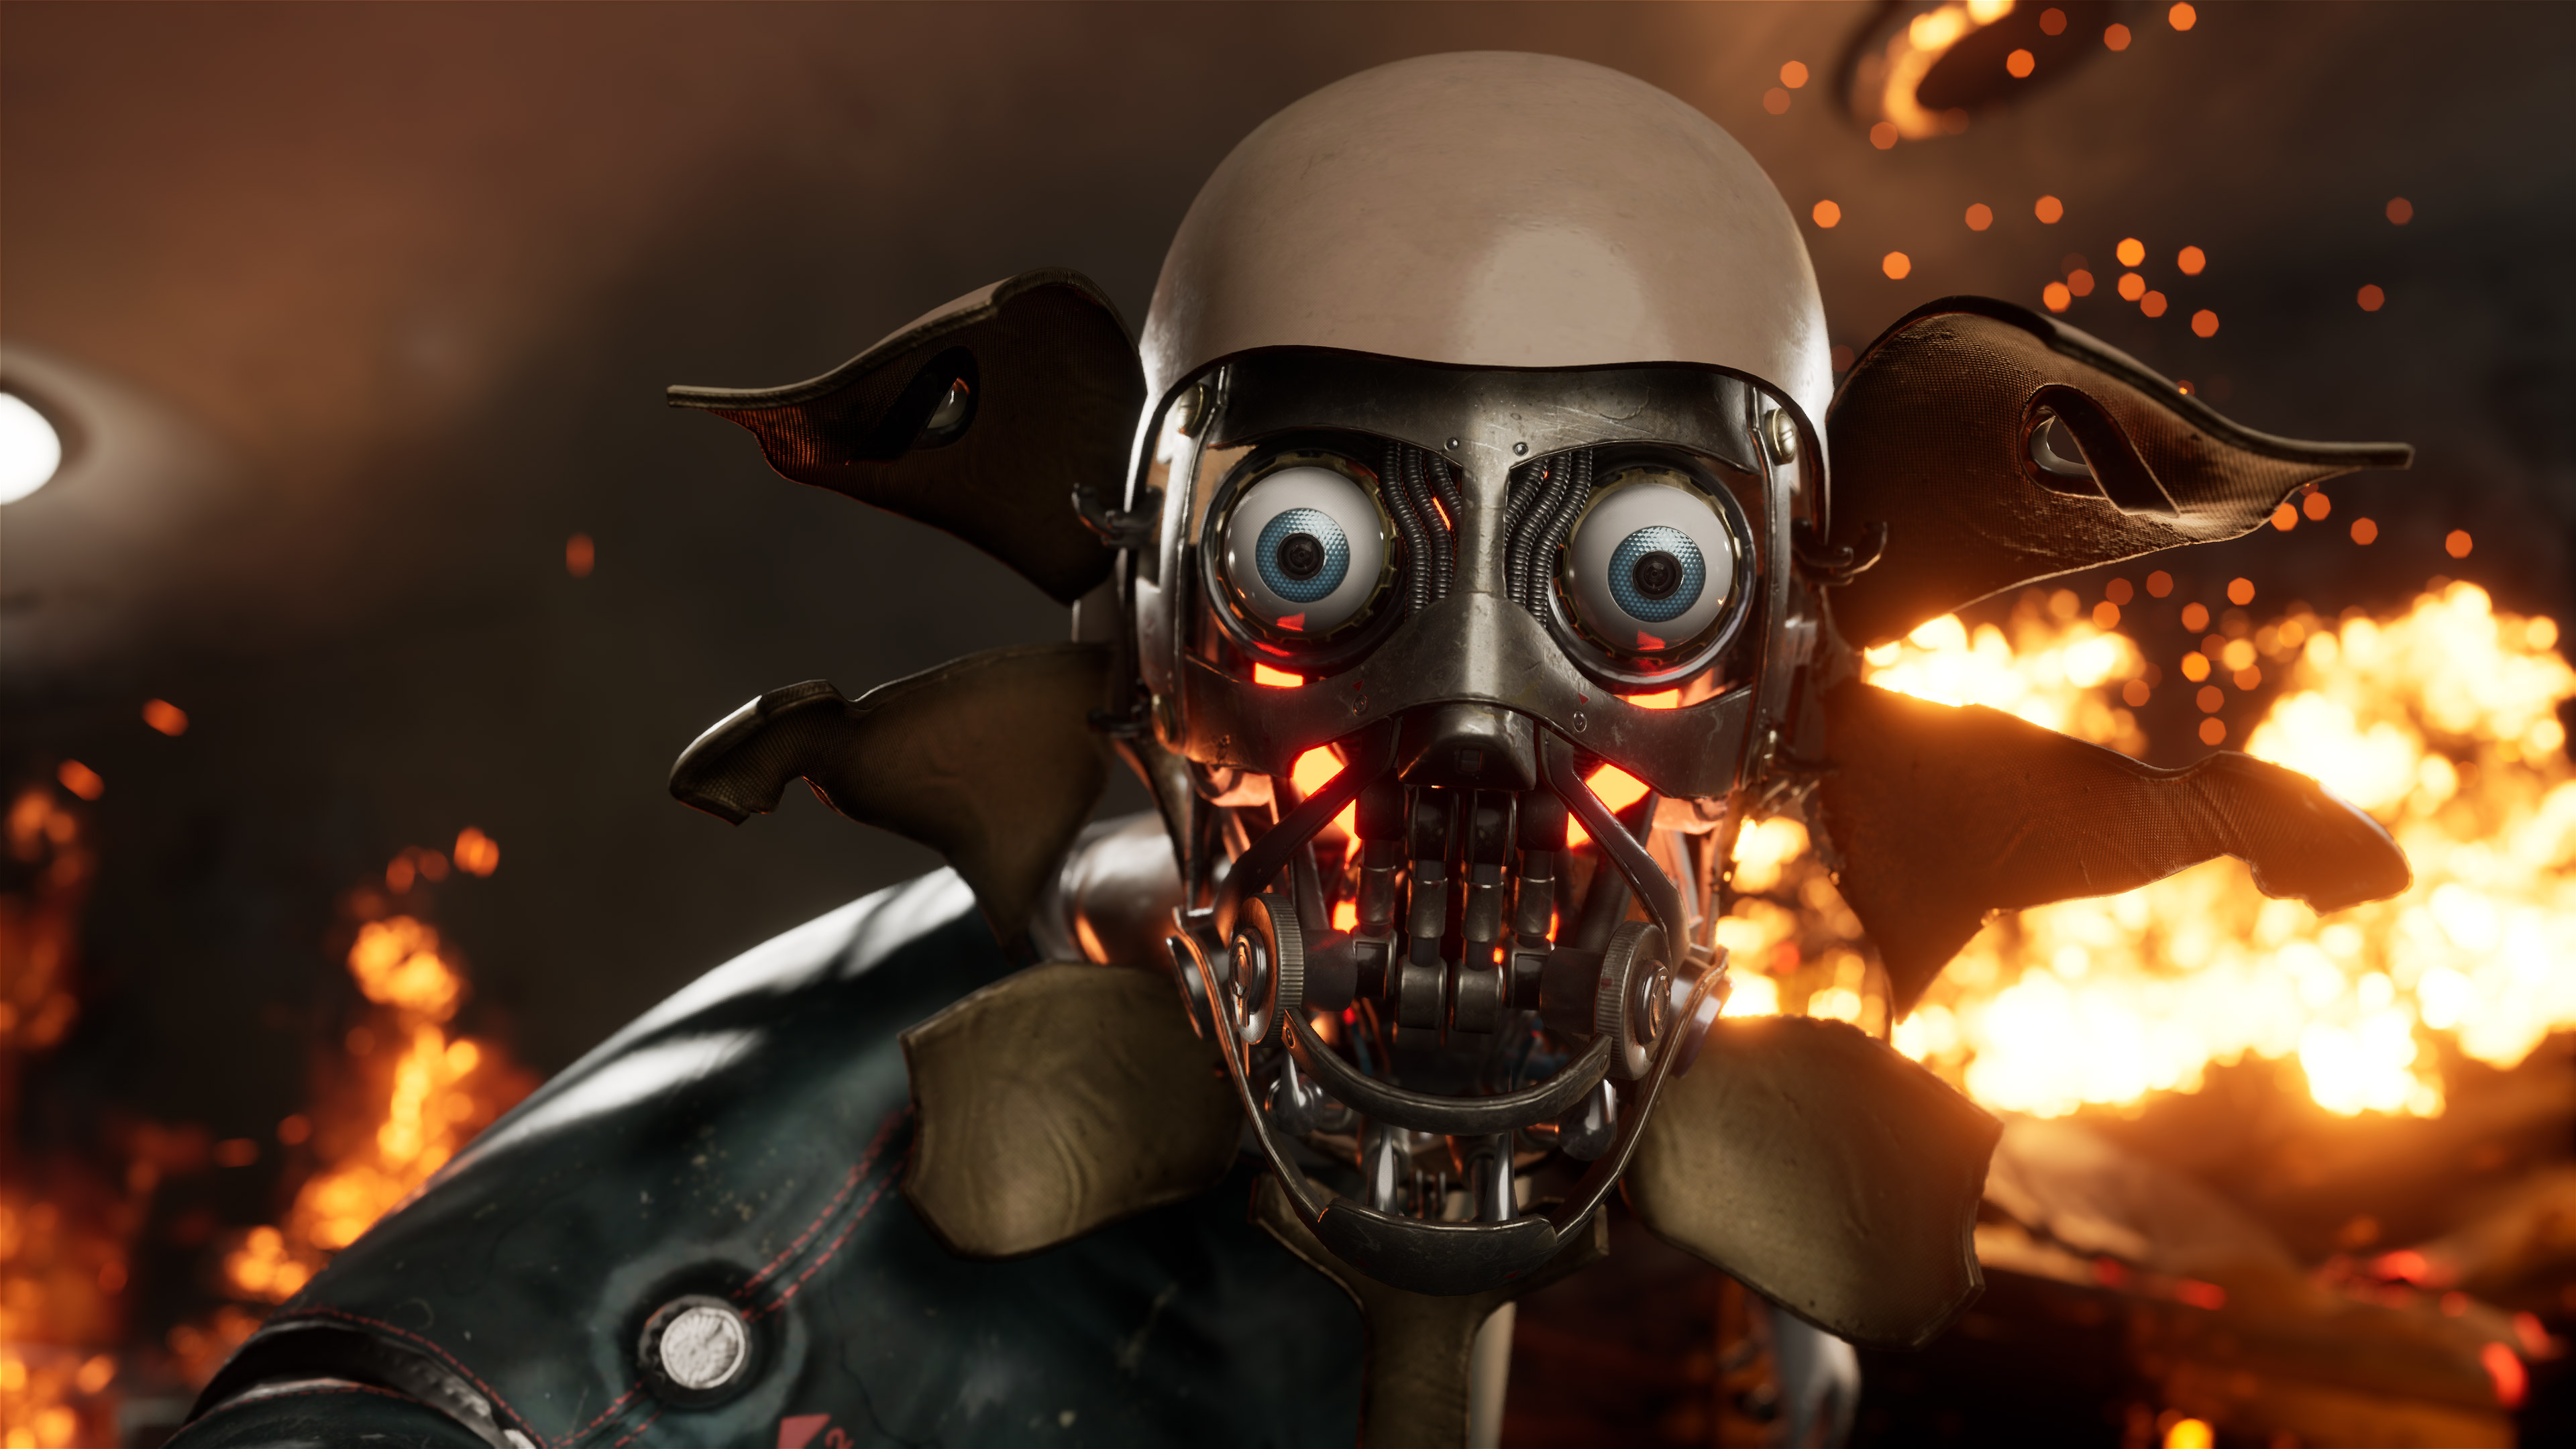 Atomic Heart Review (PS4, PS5, Xbox One, Xbox Series X/S, & PC) - Is It  Worth Buying?